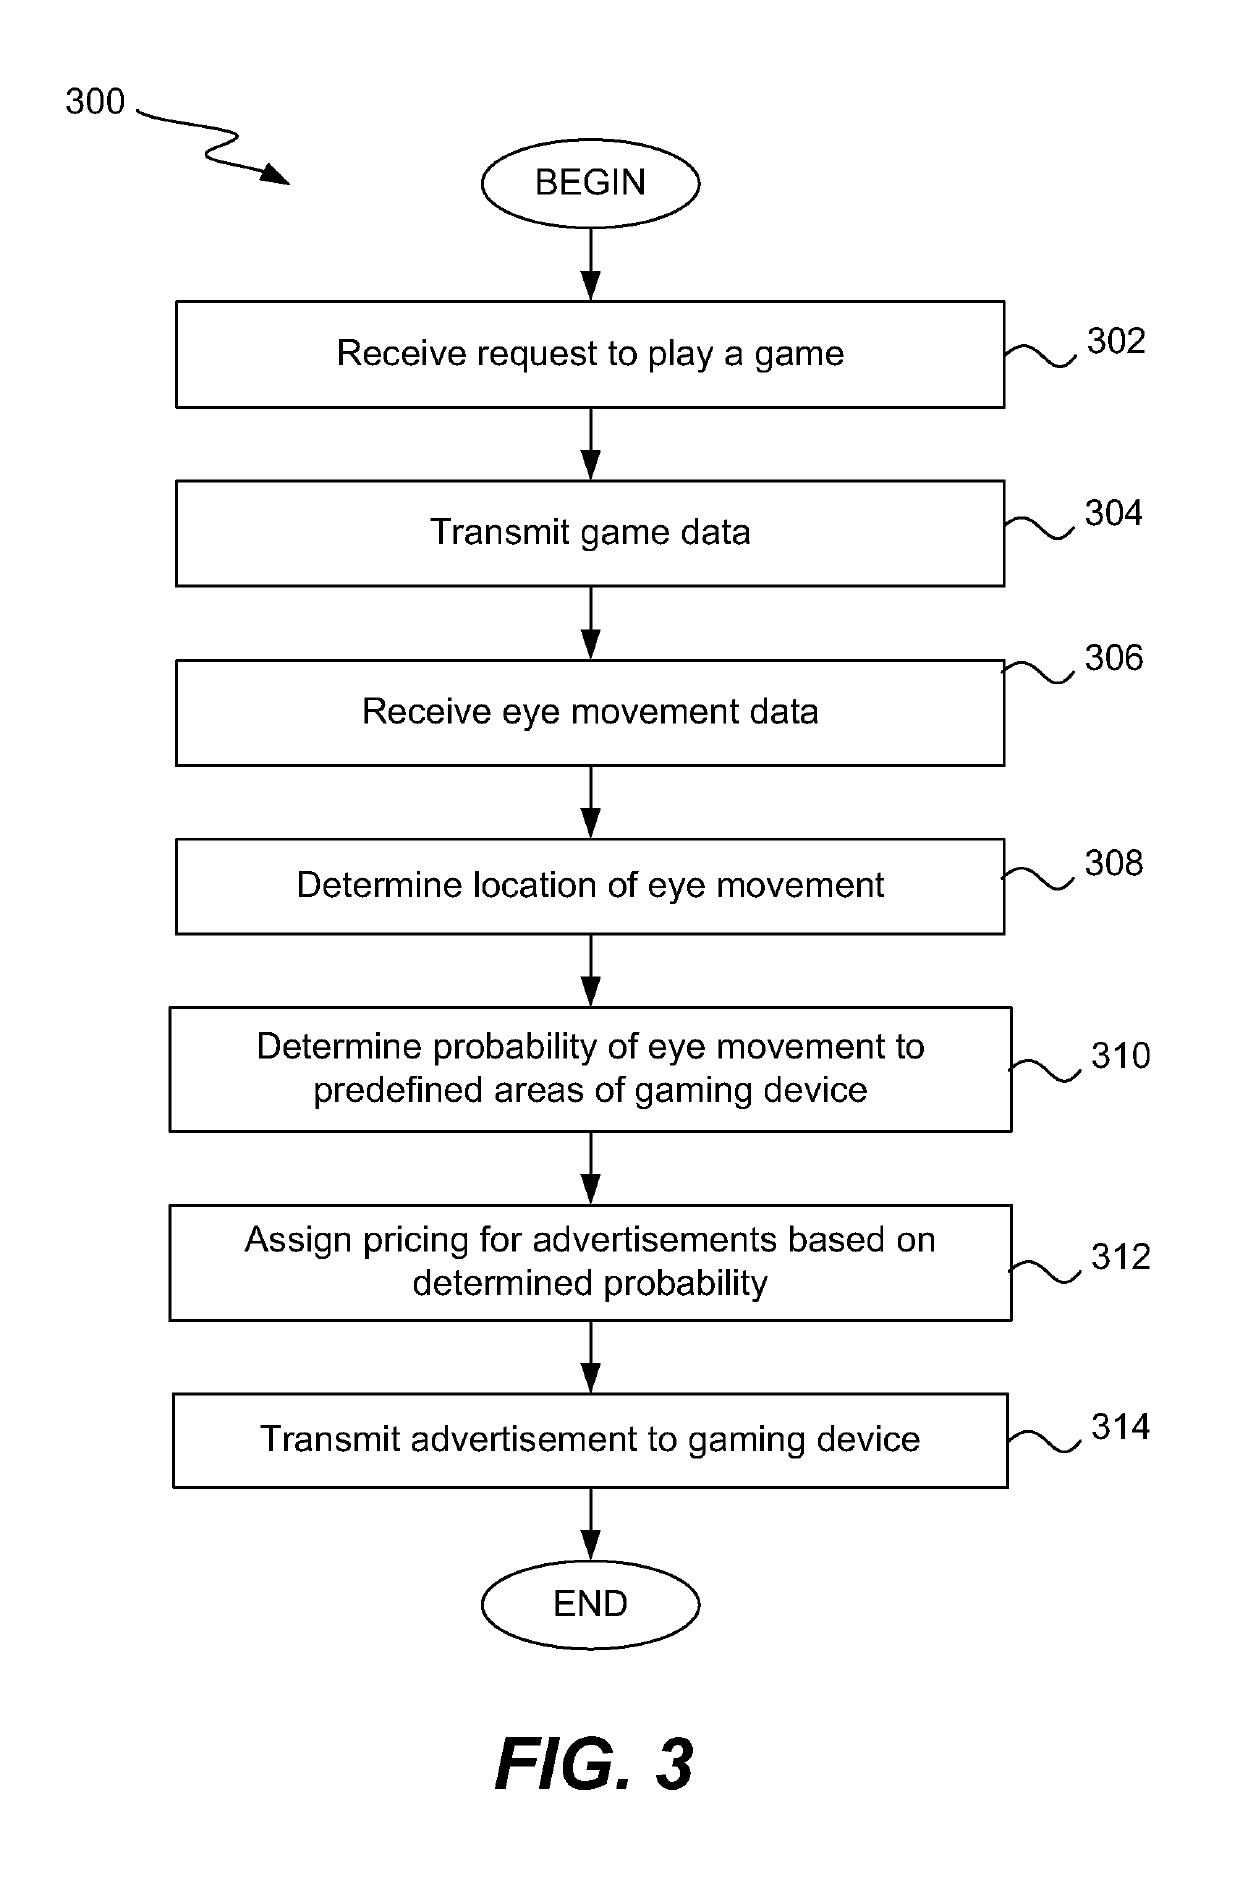 Determination of advertisement based on player physiology